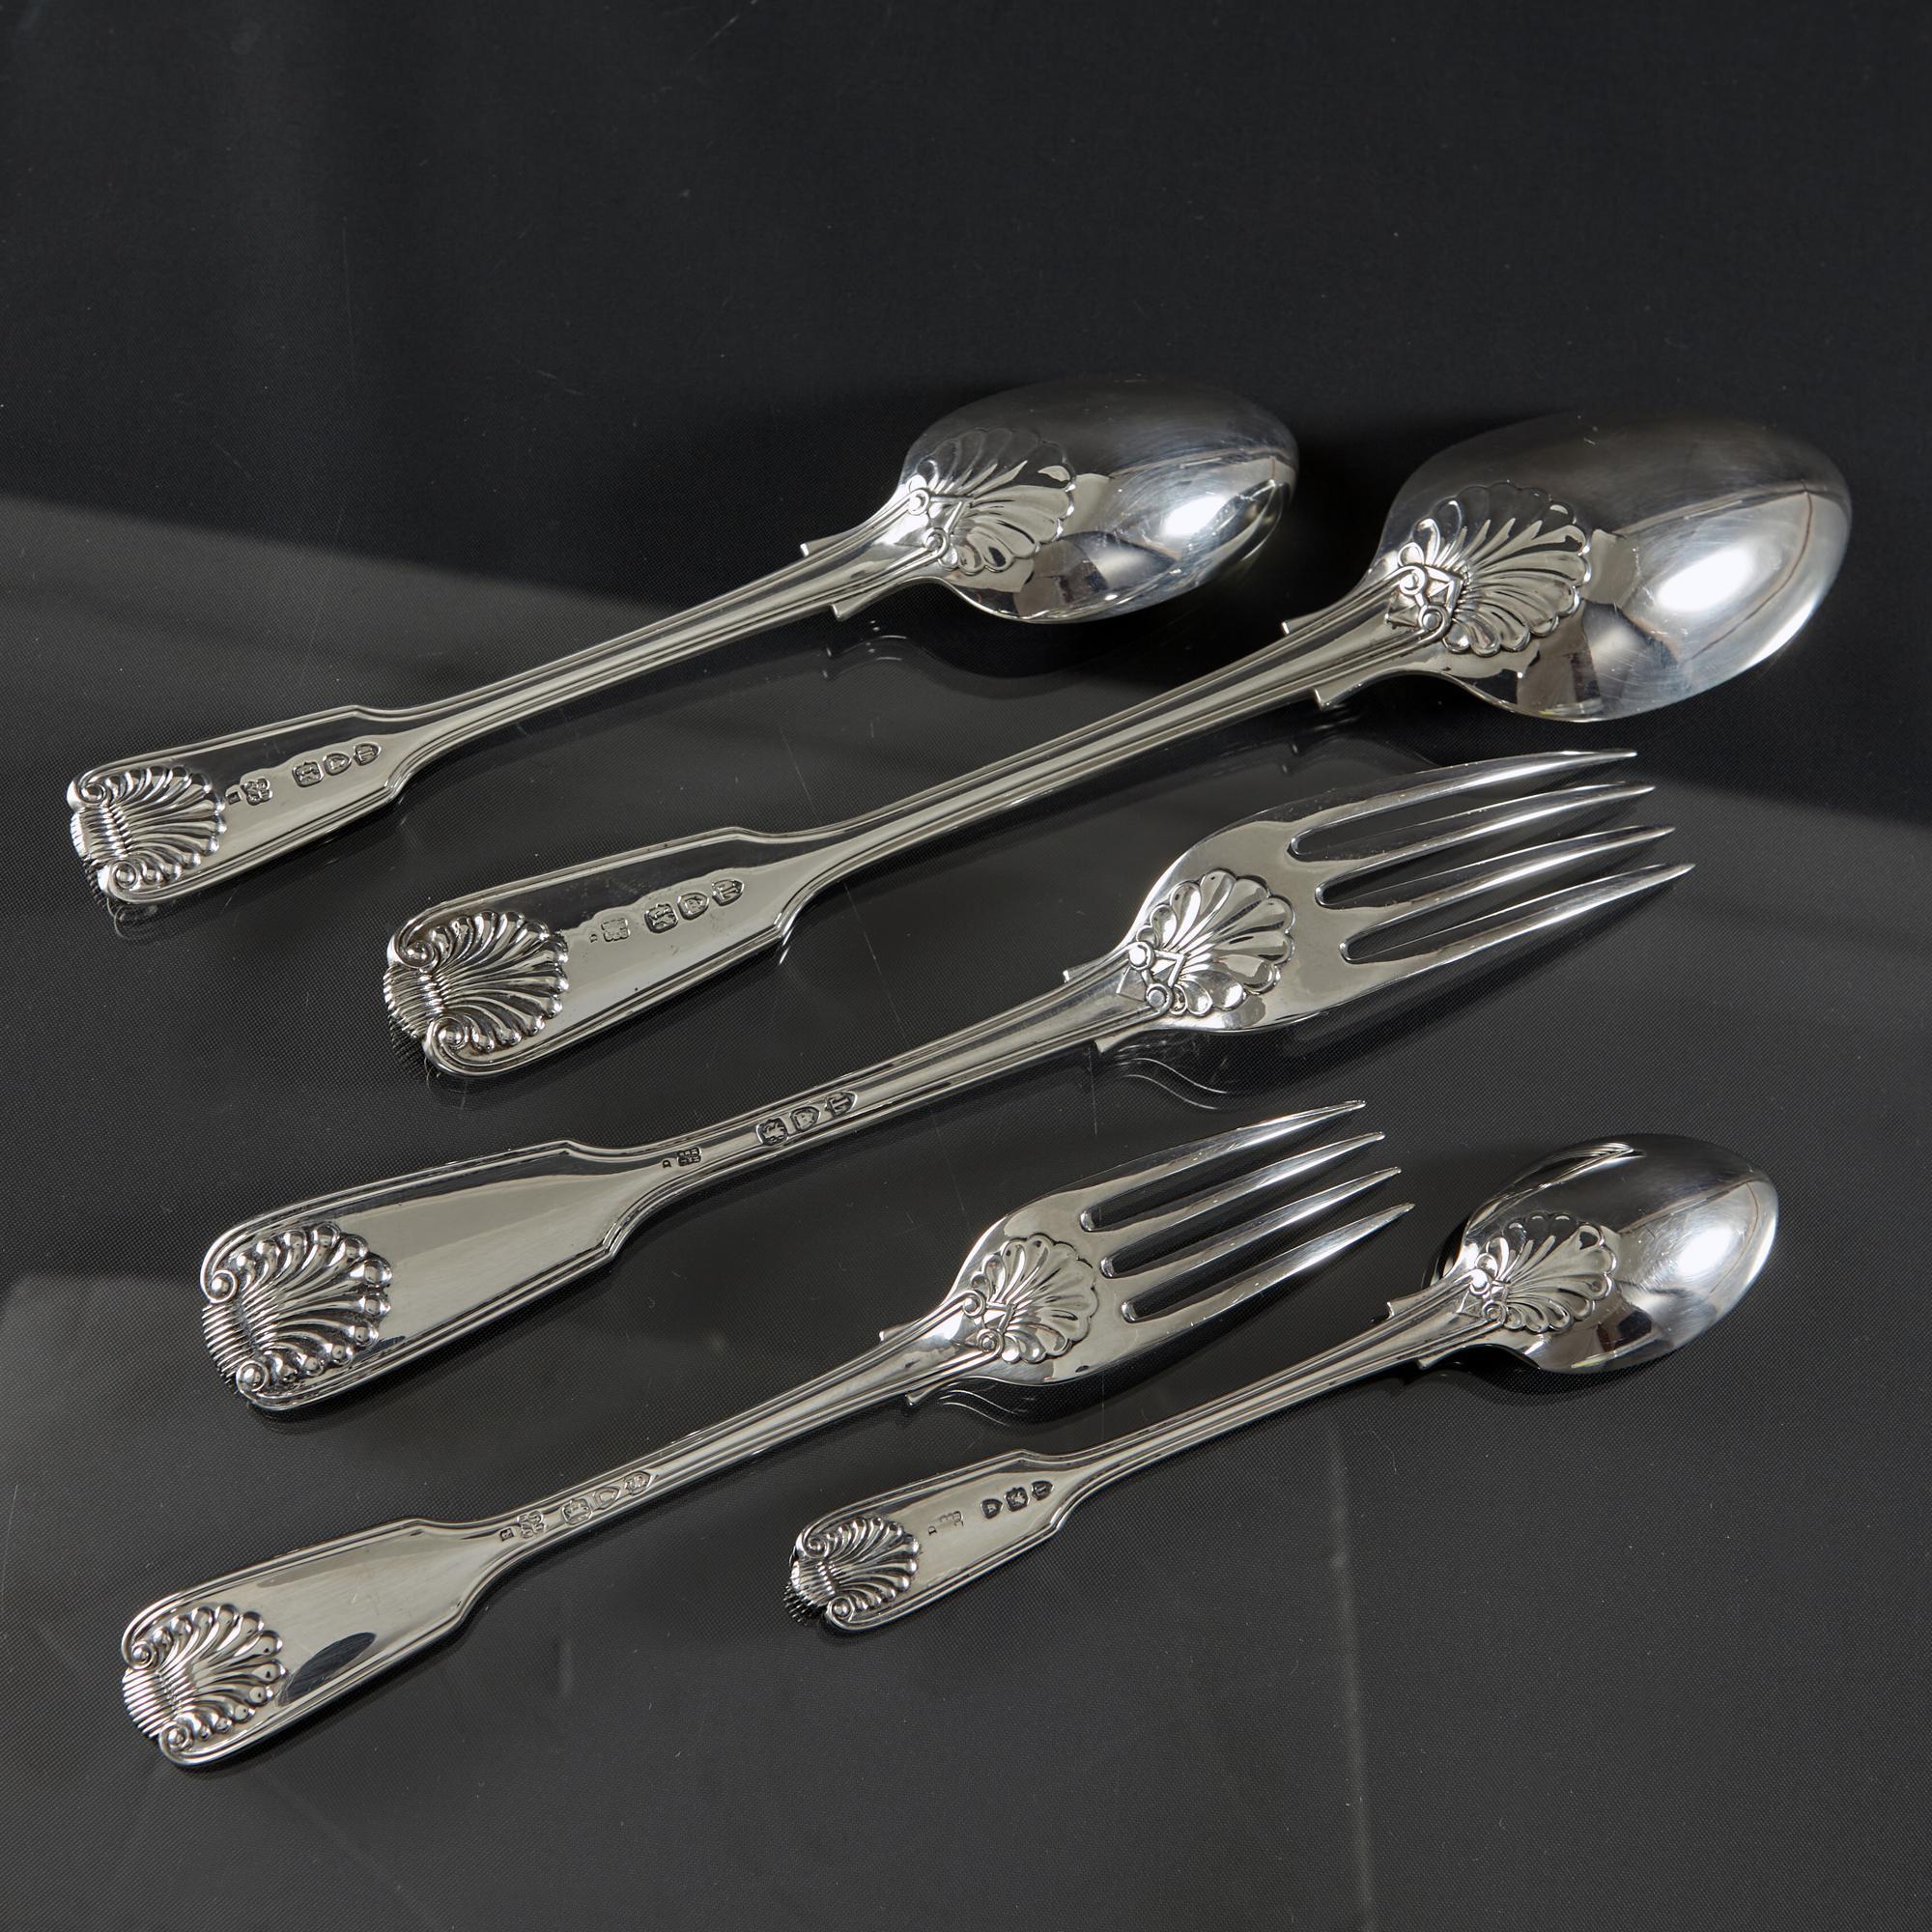 Victorian hand-forged silver cutlery set  for 12 people in the Fiddle Thread and Shell pattern.  This is a charming design featuring the classic fiddle shape, thread borders and shell motifs.   On the reverse, shells appear on the heads and heels of